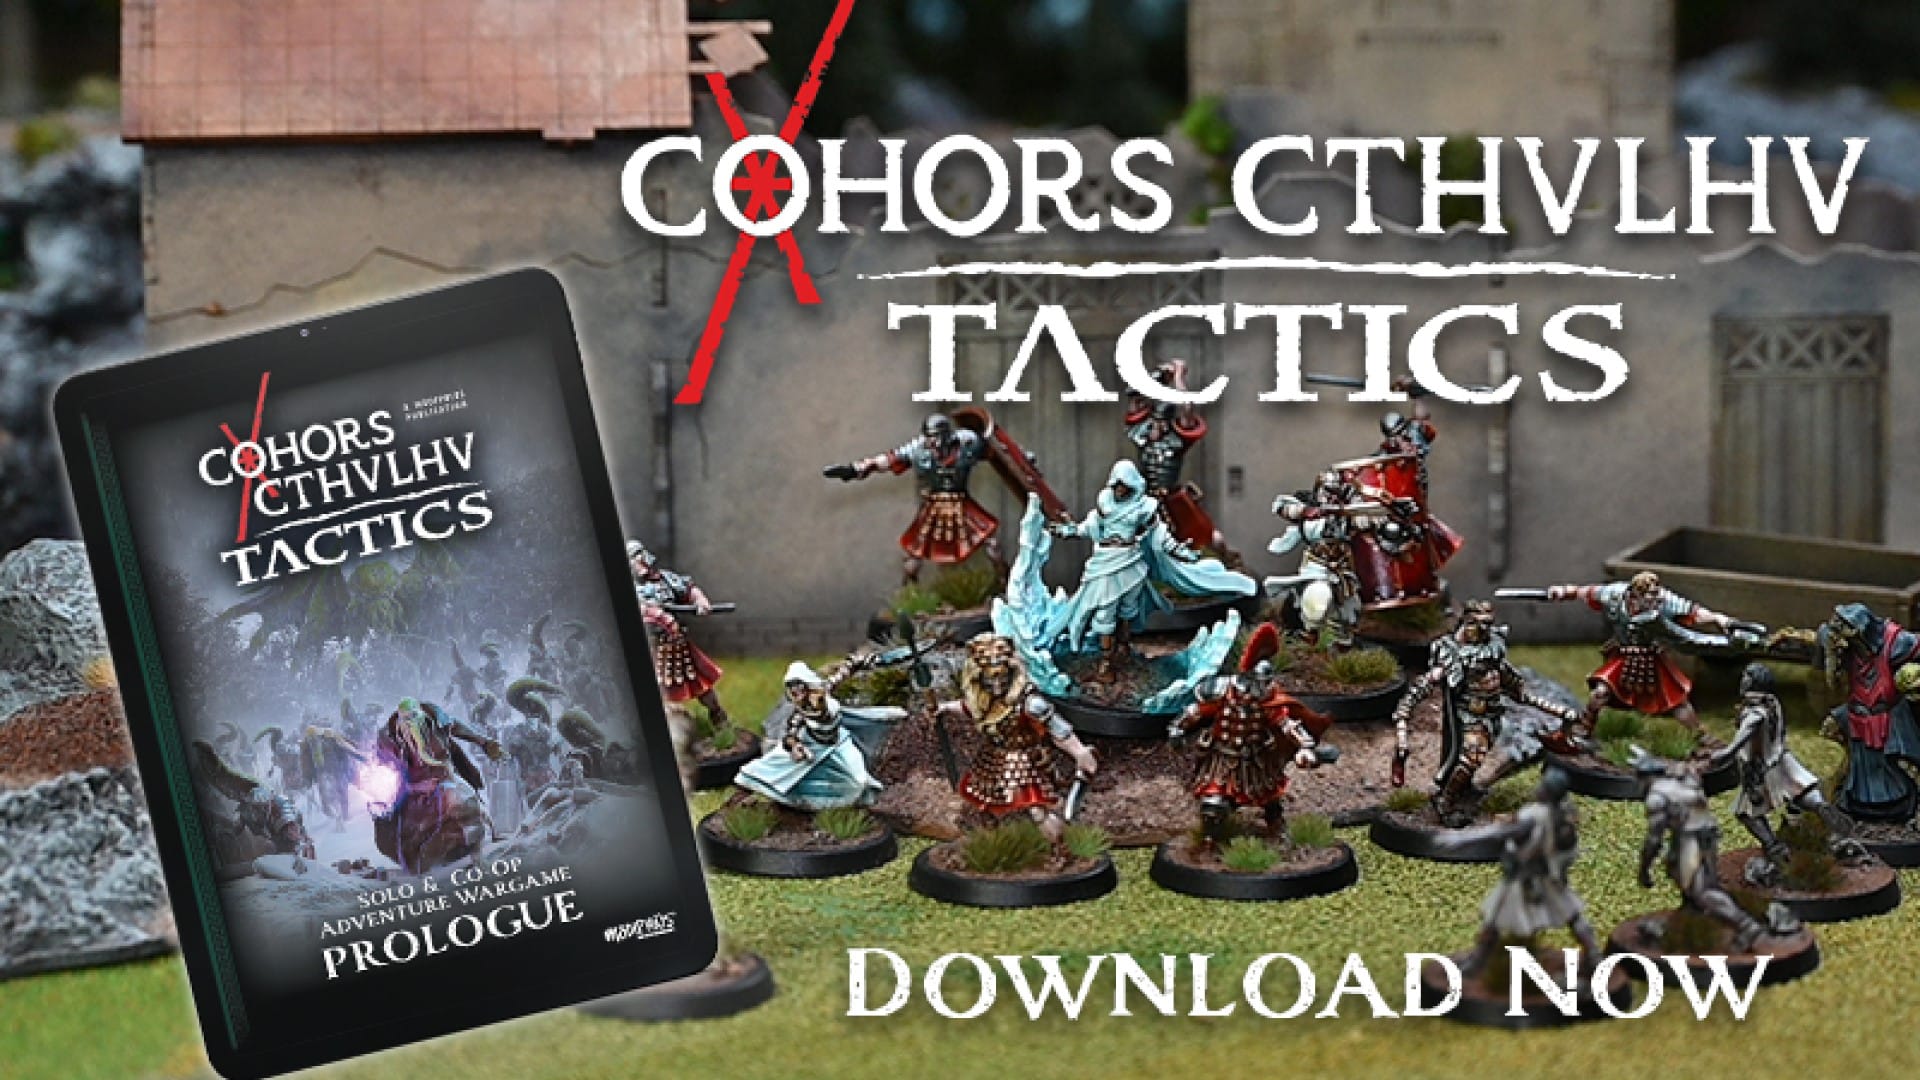 A promotional image of the Cohors Cthulhu: Tactics quickstart rules, showing a group of miniatures on a battlefield.